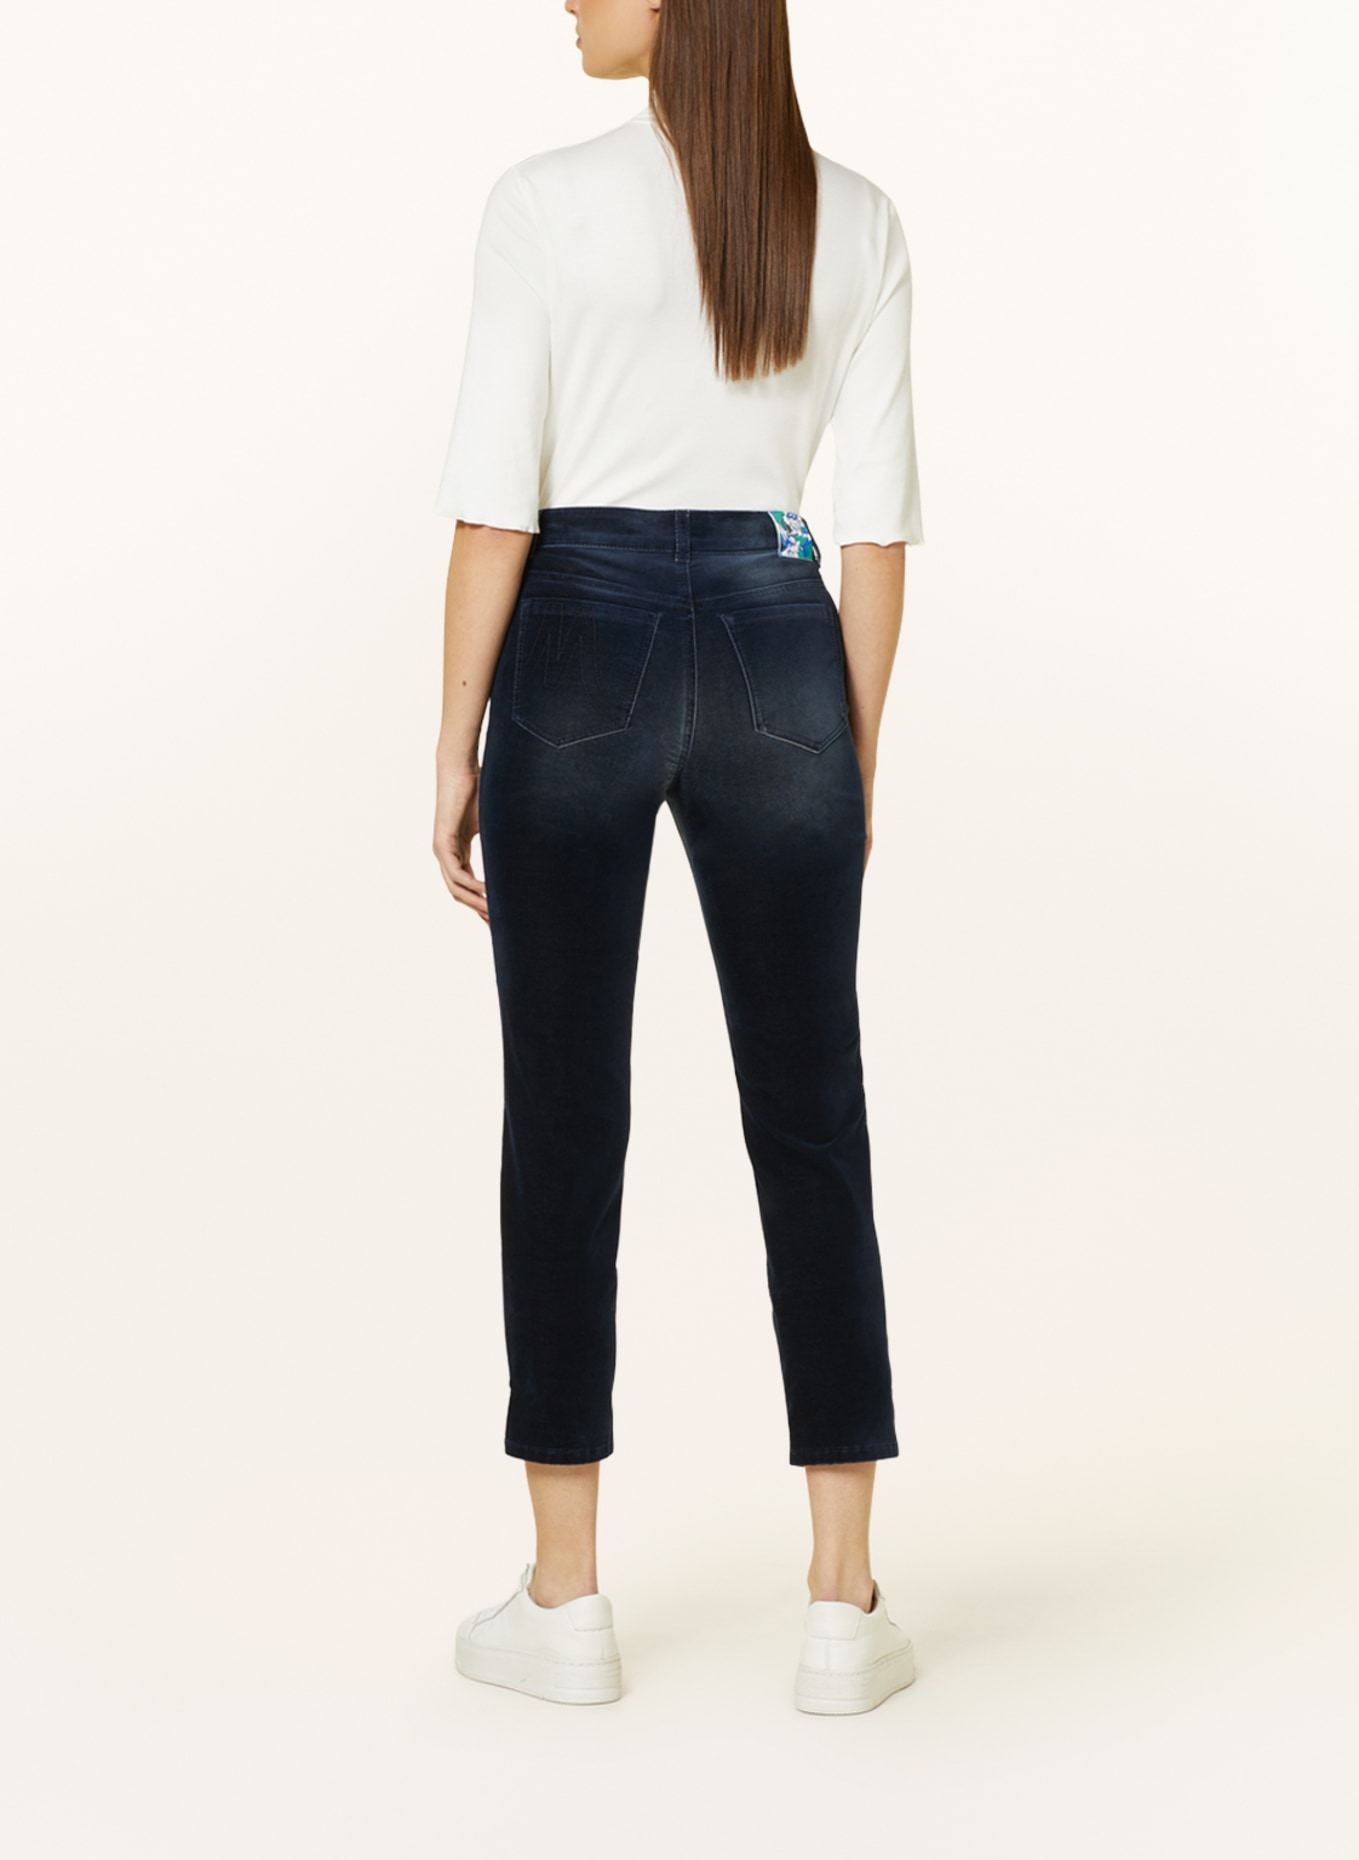 Violet stretch velvet jeans | Ladies Country Clothing | Cordings US